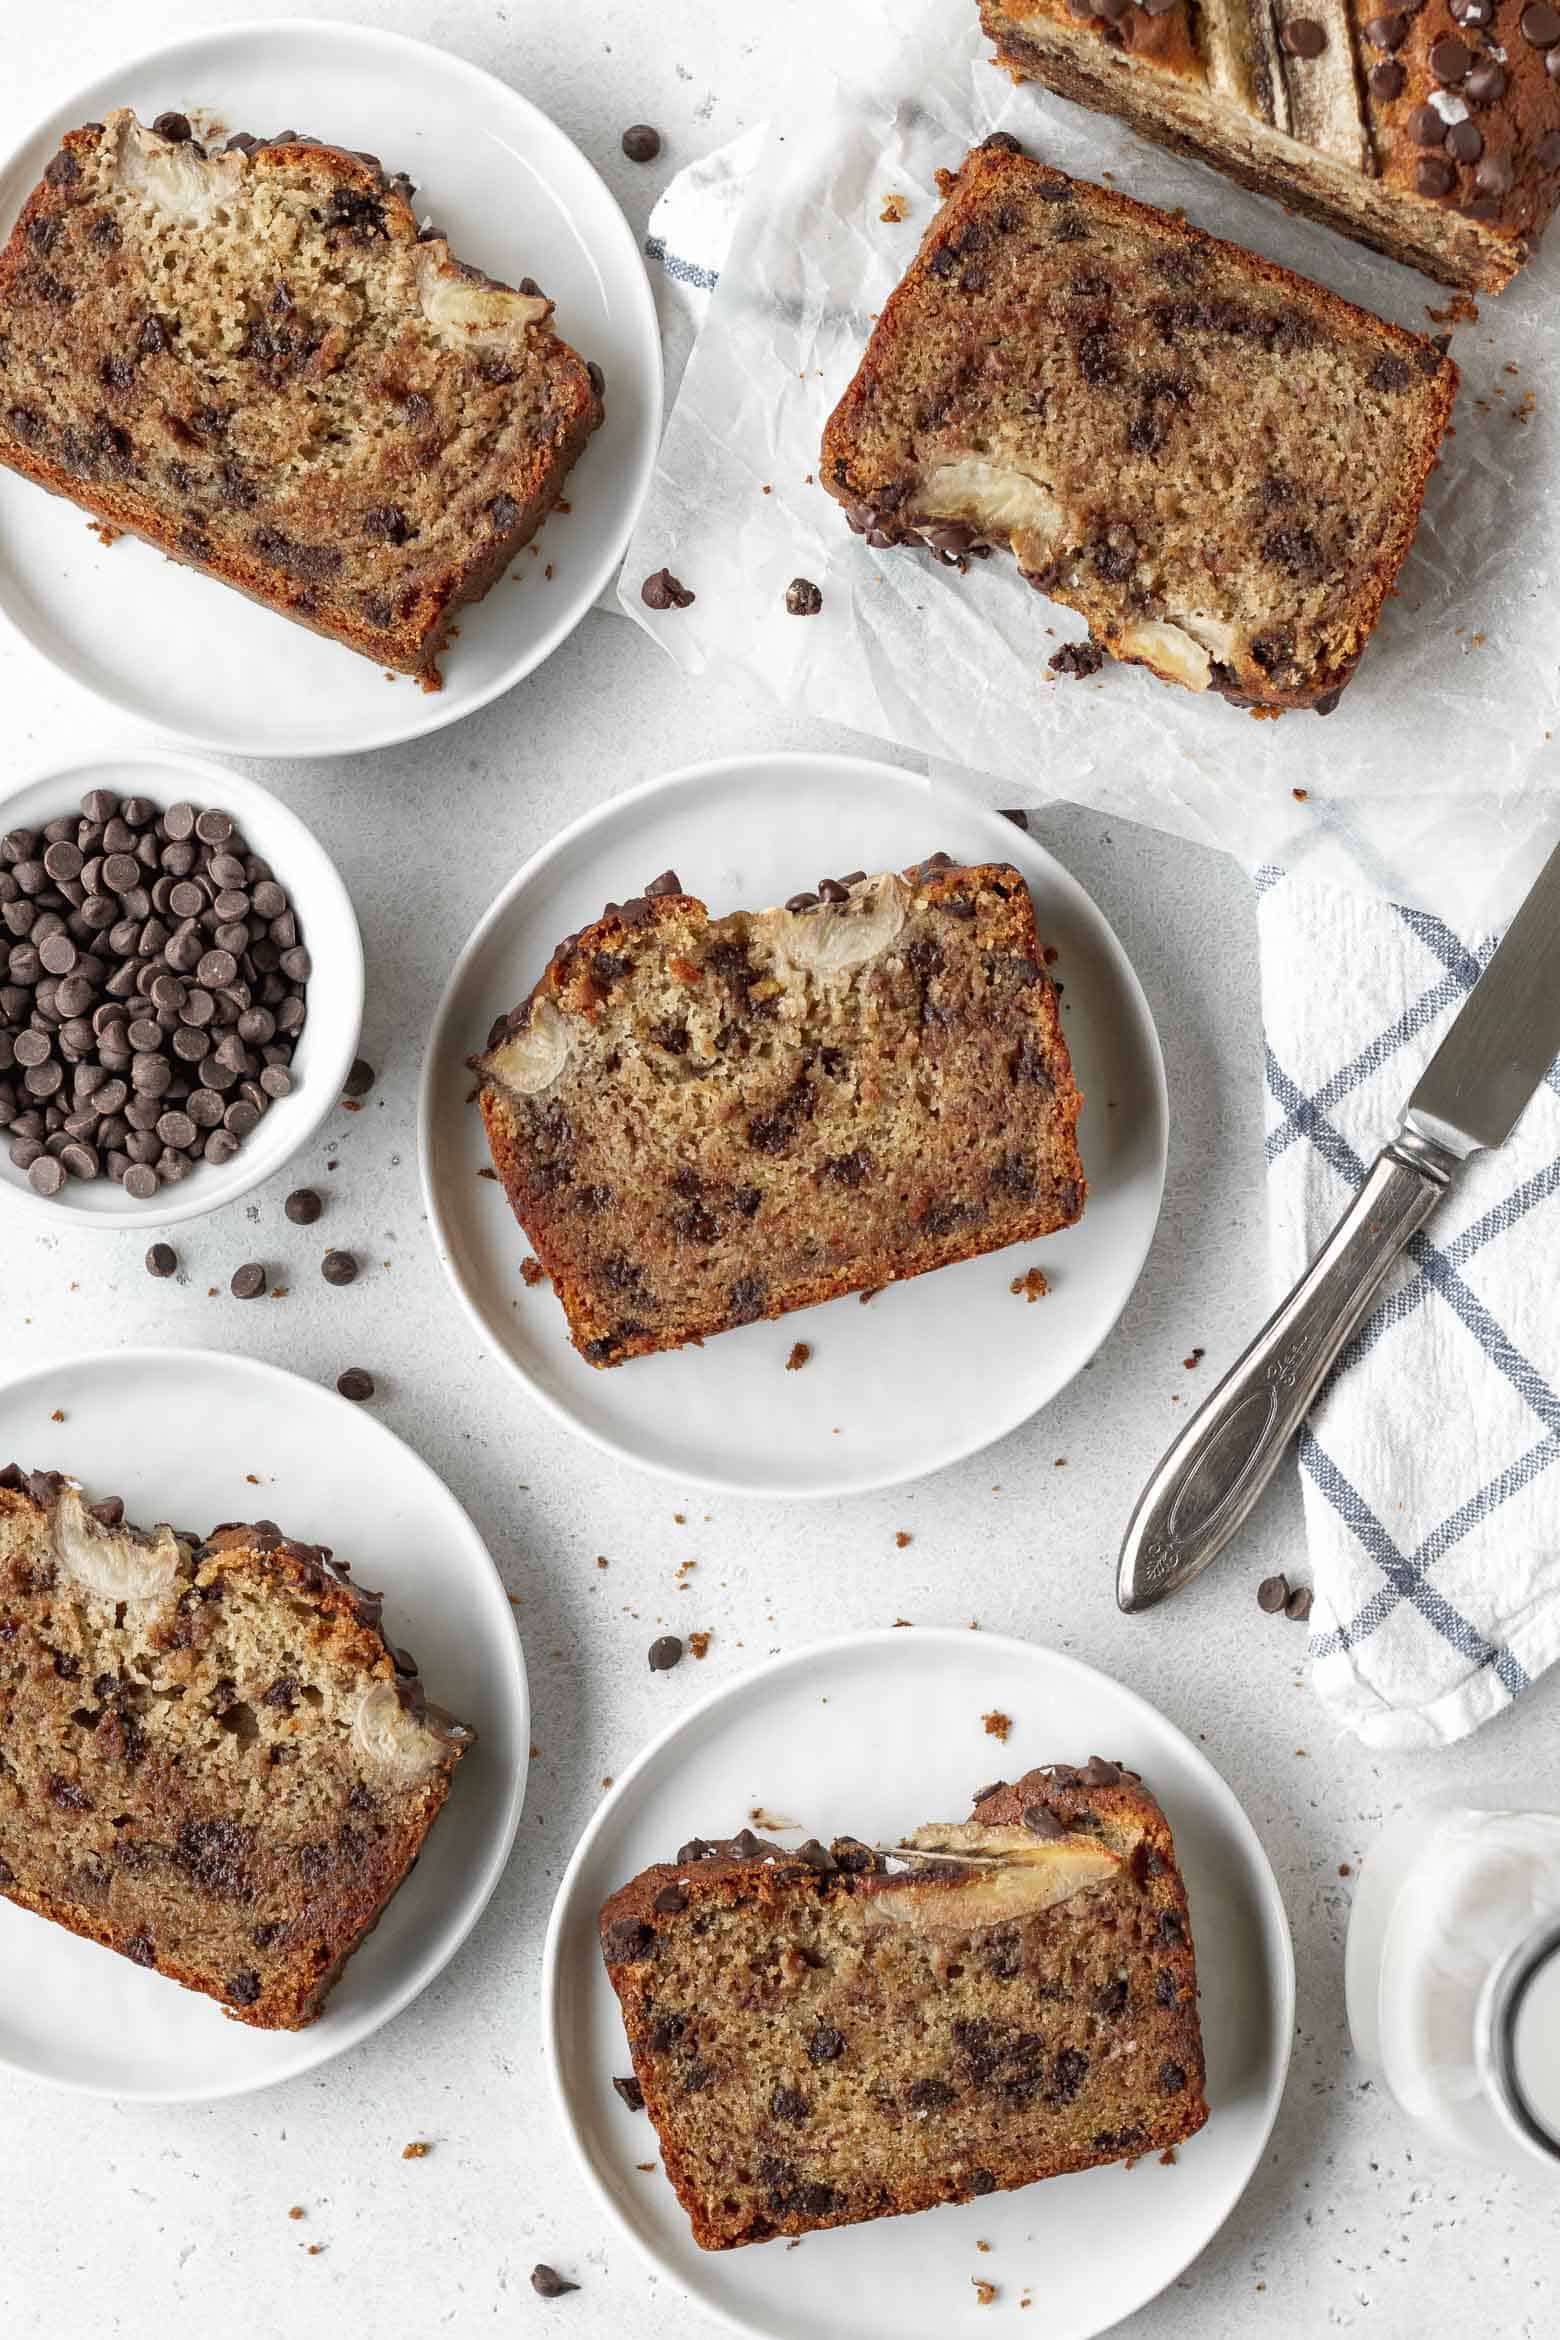 Slices of gluten free chocolate chip banana bread on plates